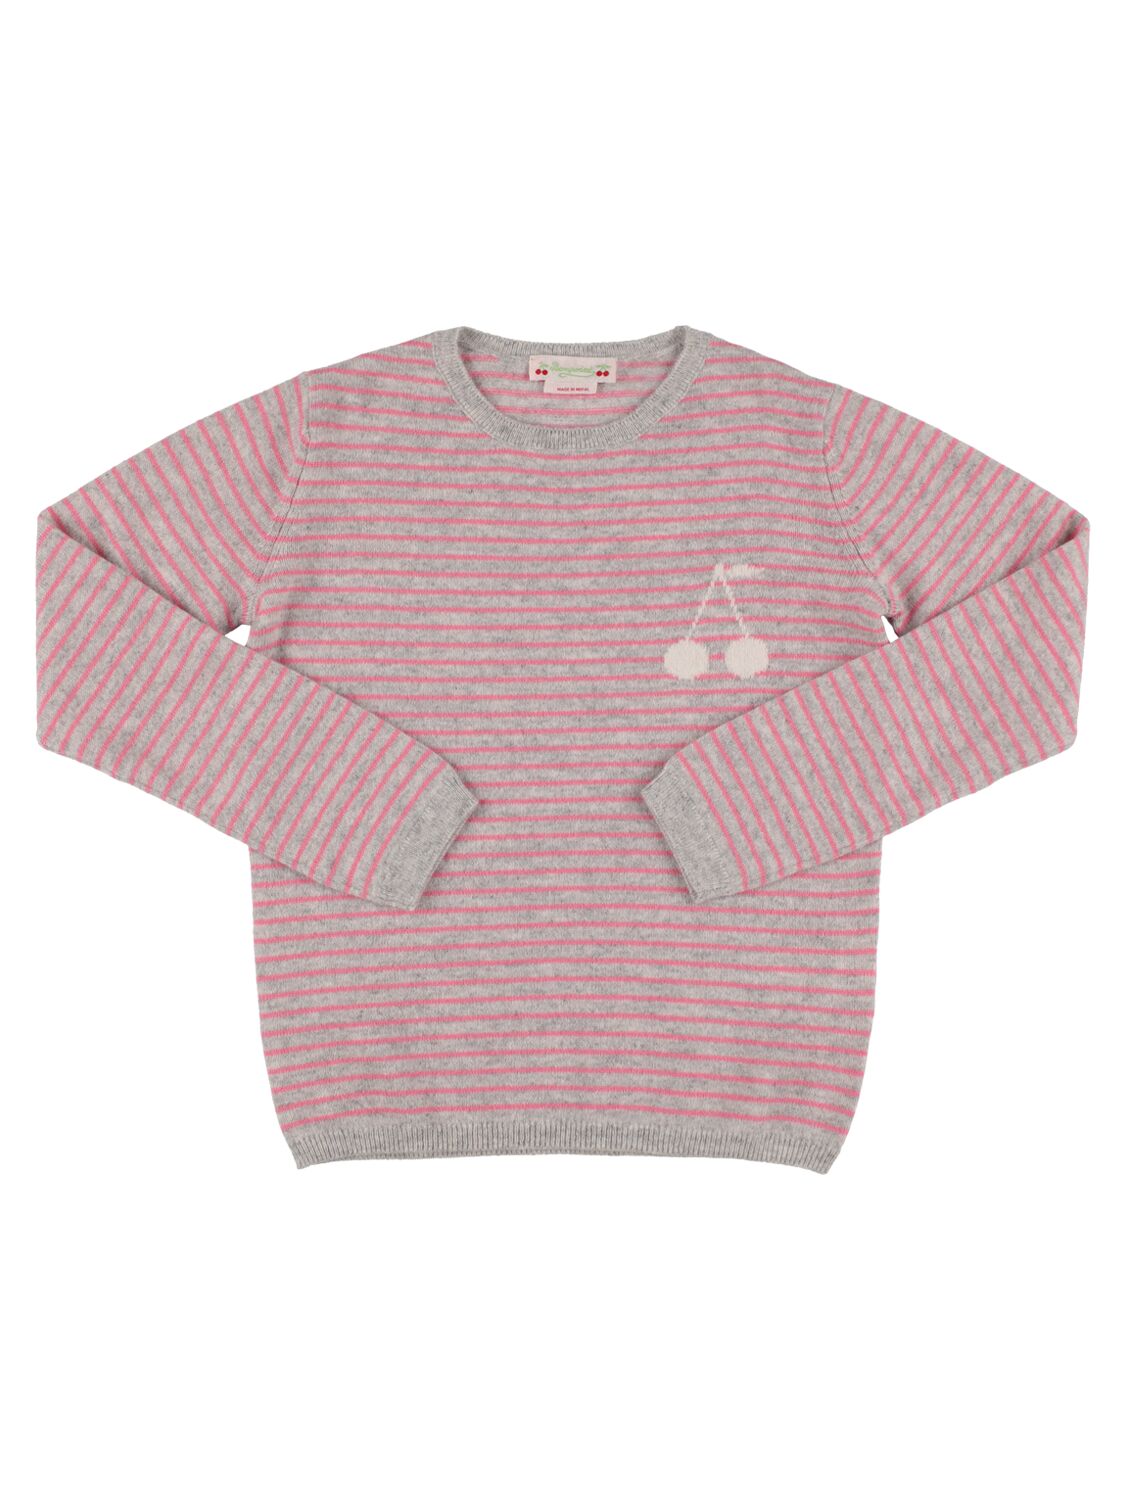 Bonpoint Kids' Brunelle Intarsia Cashmere Sweater In Pink